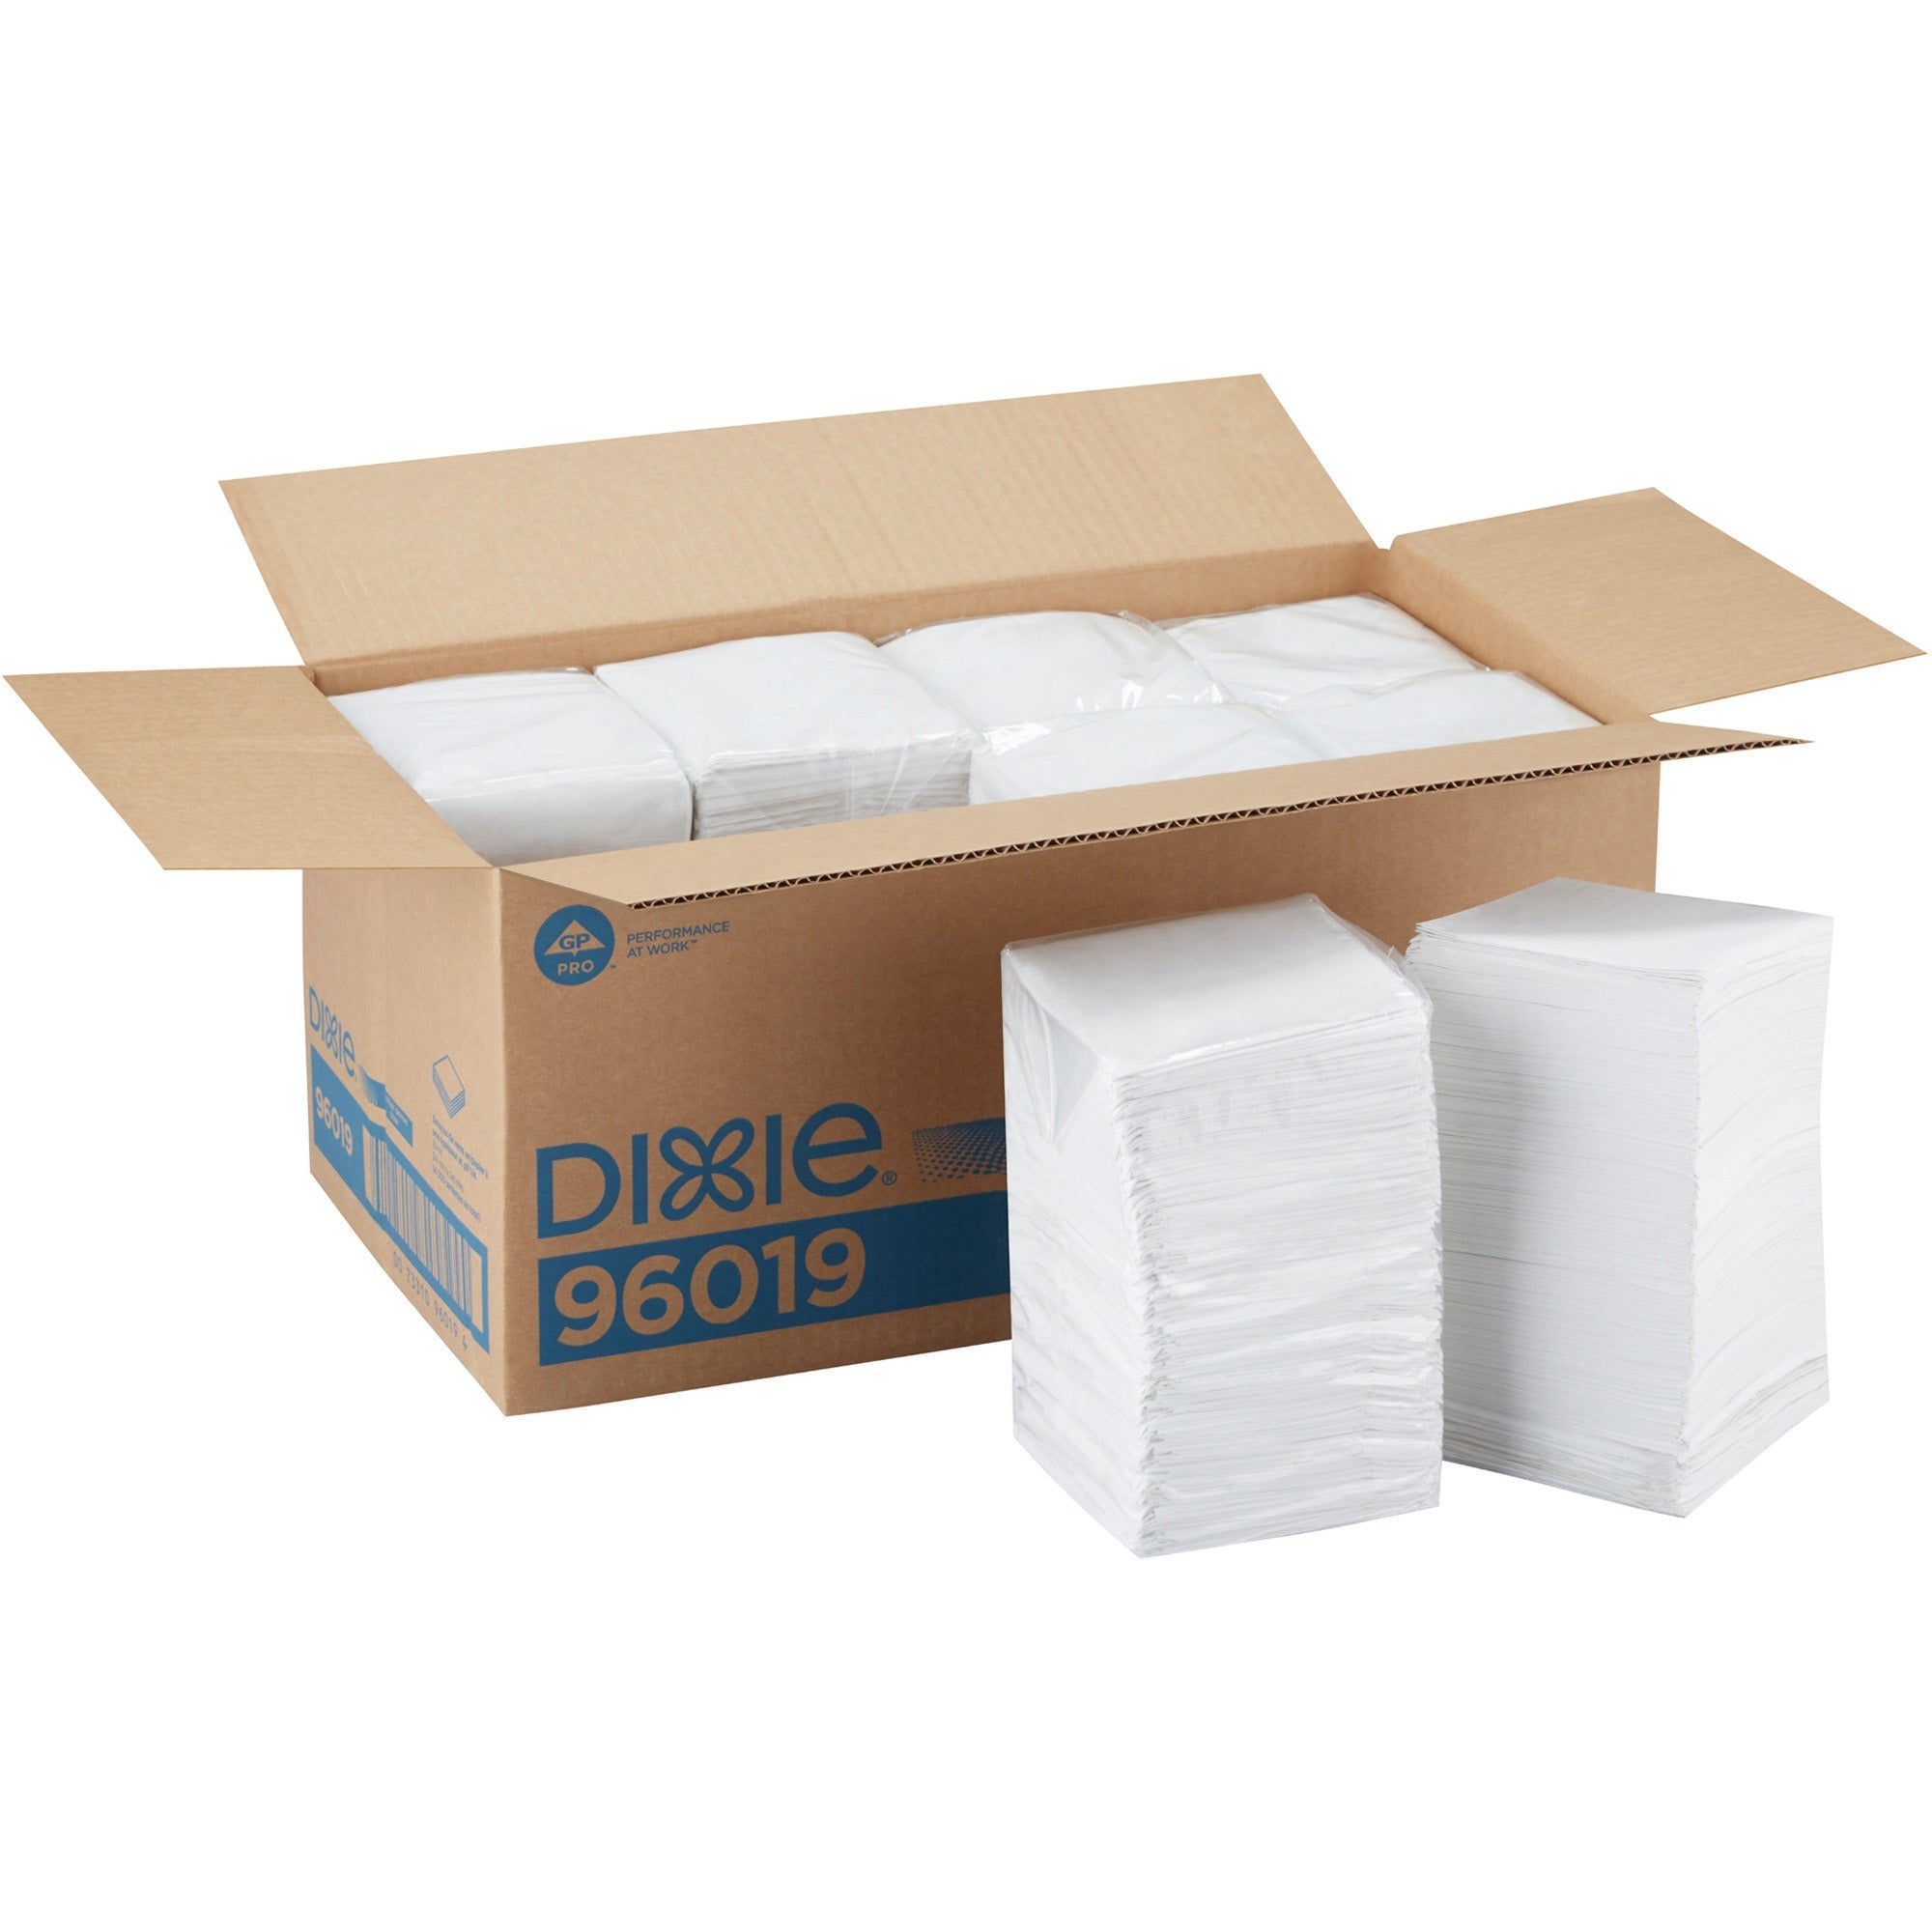 dixie-1-4-fold-beverage-napkin-1-ply-950-x-950-white-paper-soft-absorbent-for-beverage-restaurant-500-per-pack-8-carton_gpc96019ct - 1